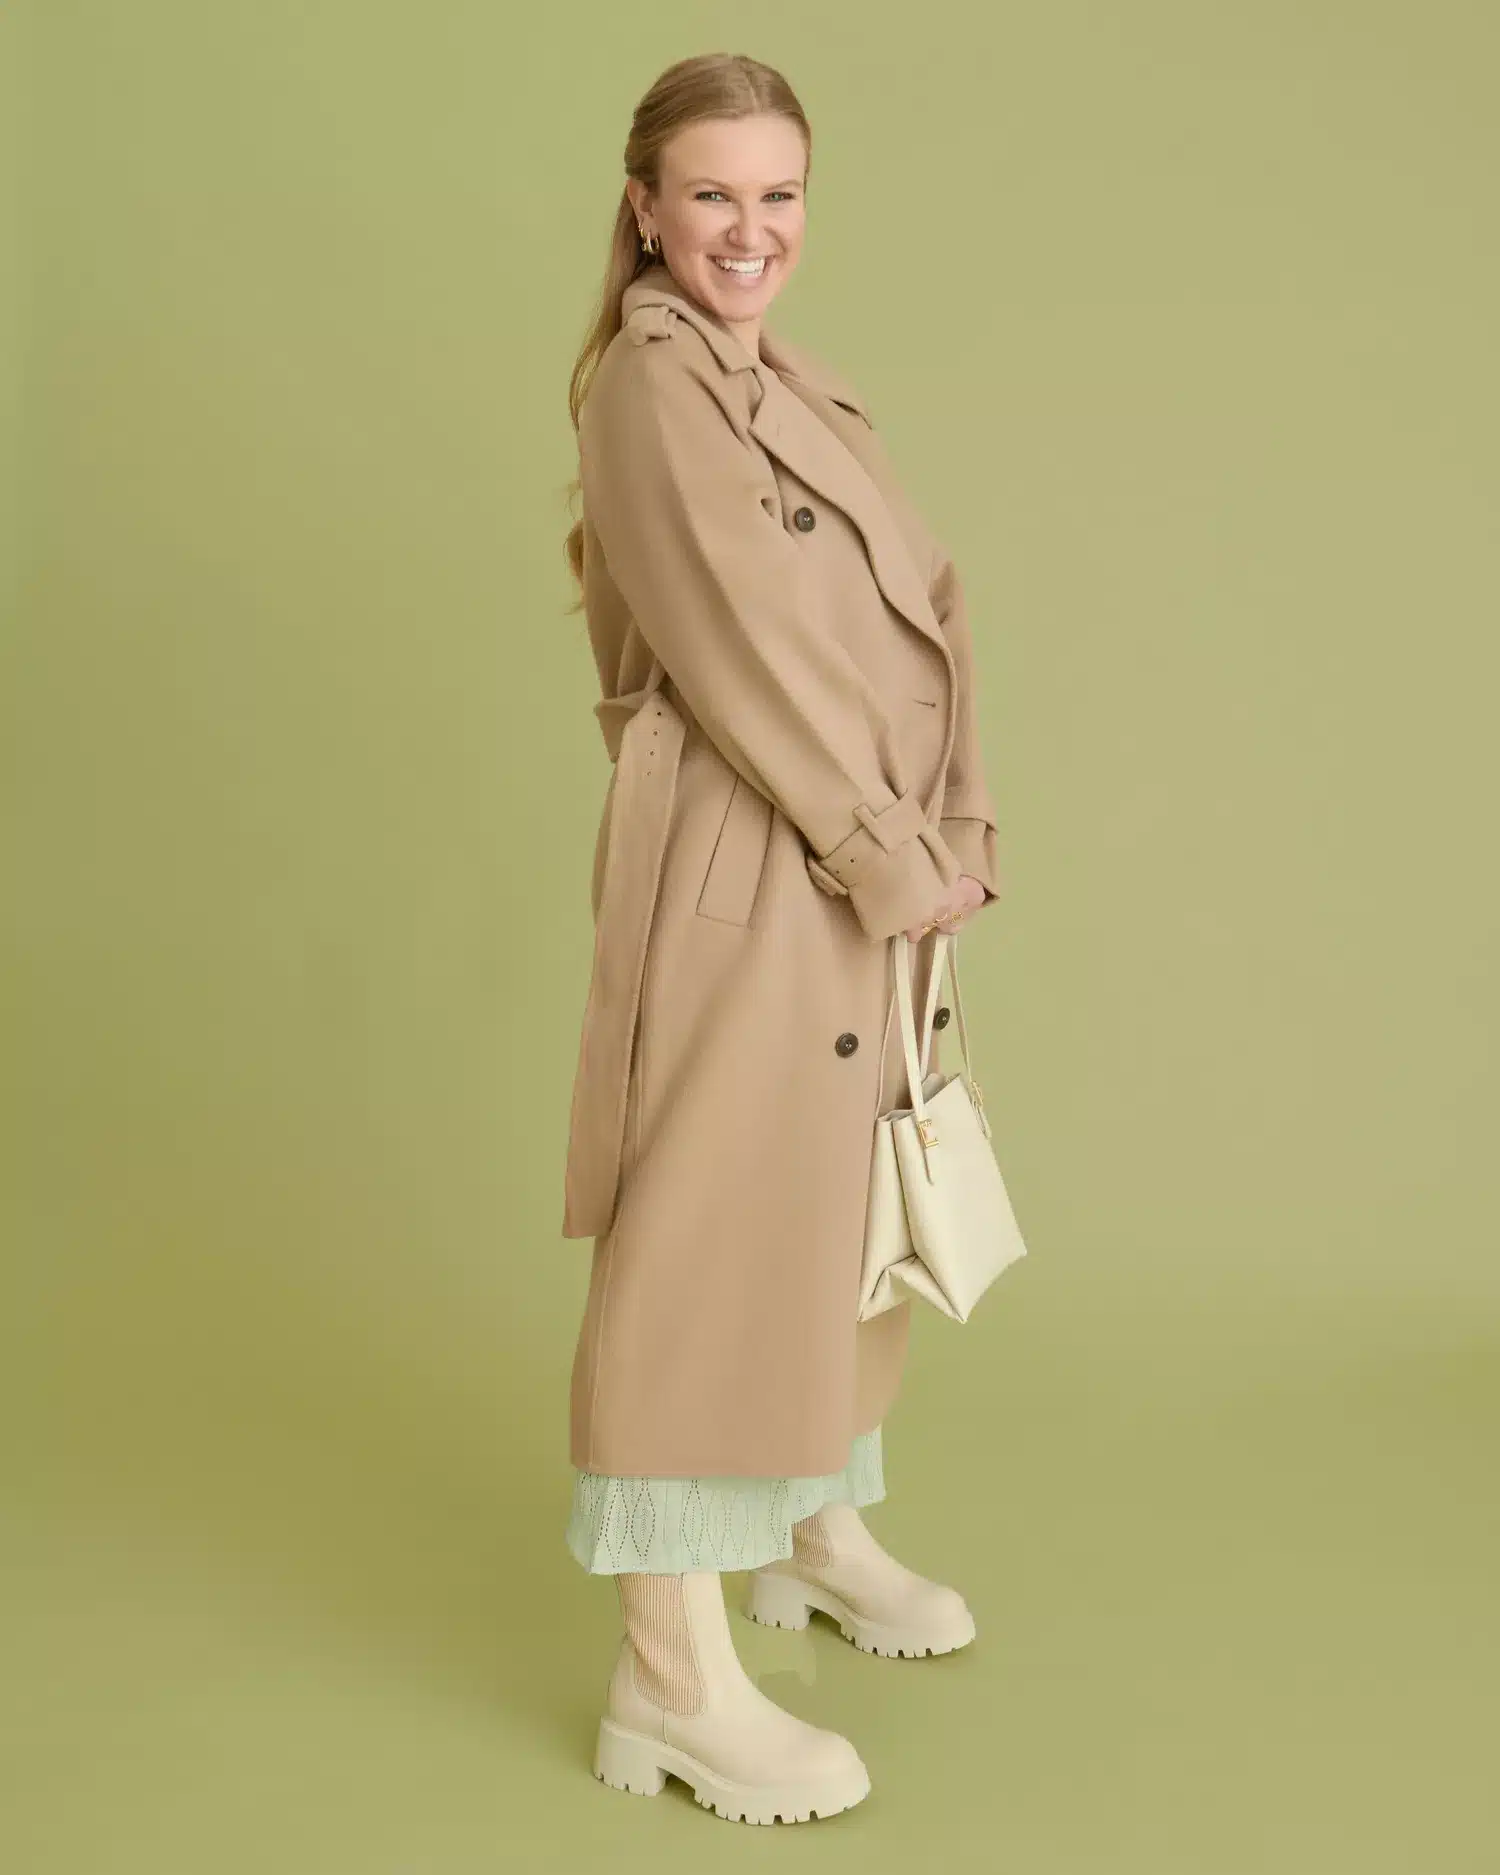 Long coats to add additional layers